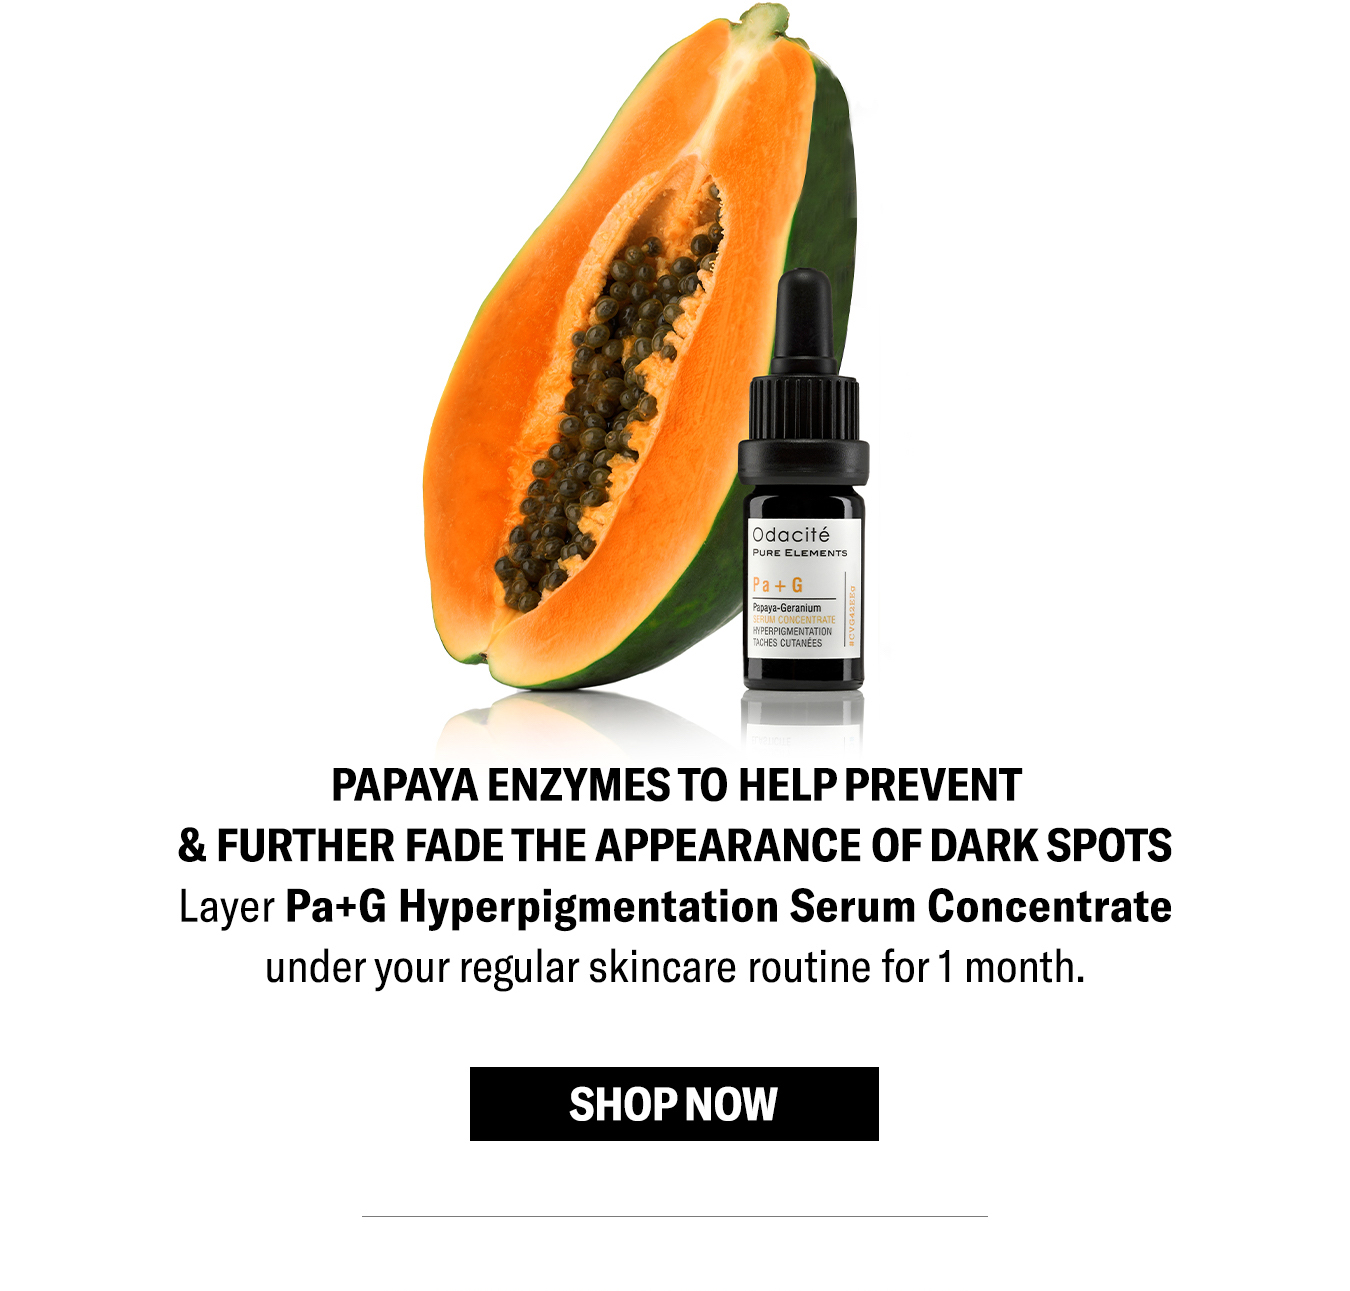 Papaya Enzymes to help prevent & further fade the appearance of dark spots.